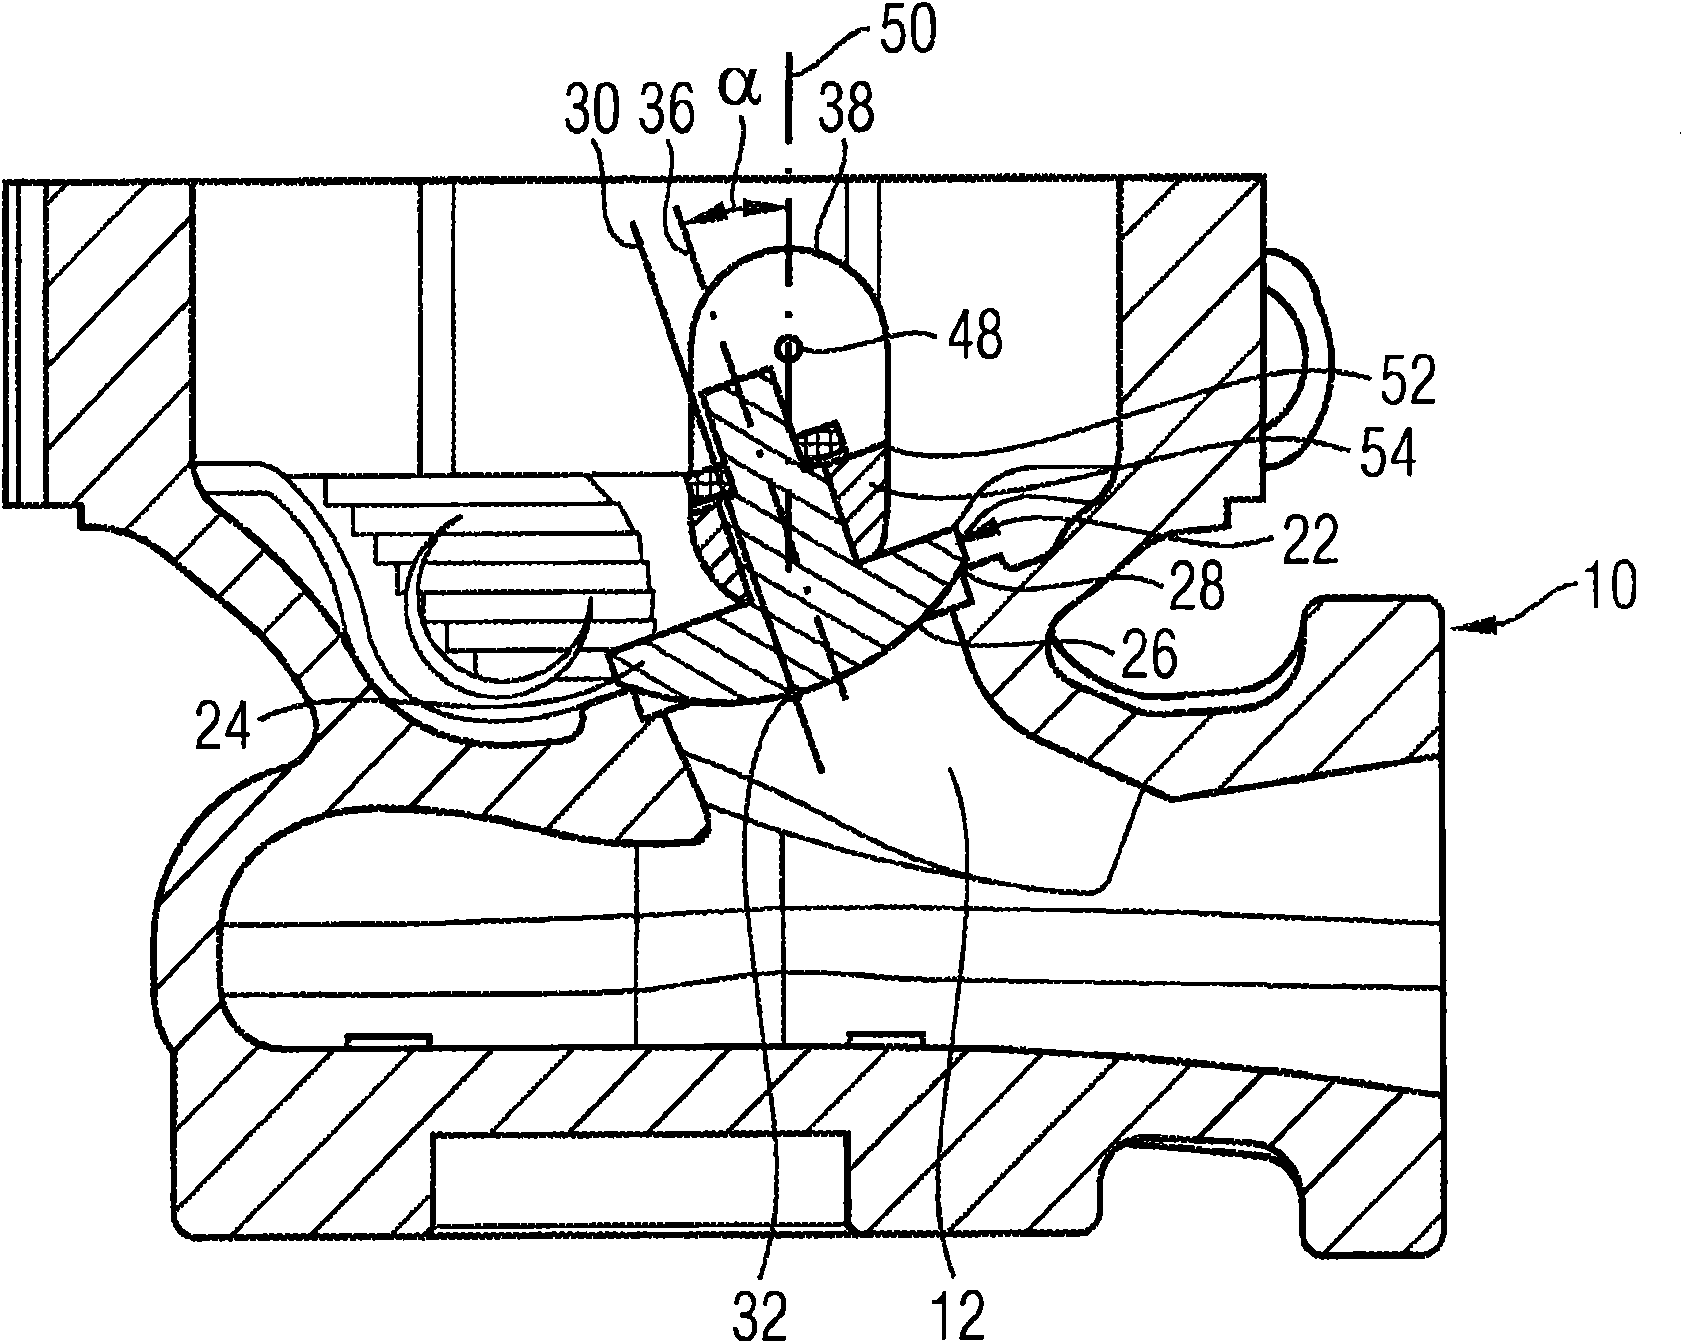 Turbocharger comprising an actuator for opening and closing a wastegate duct